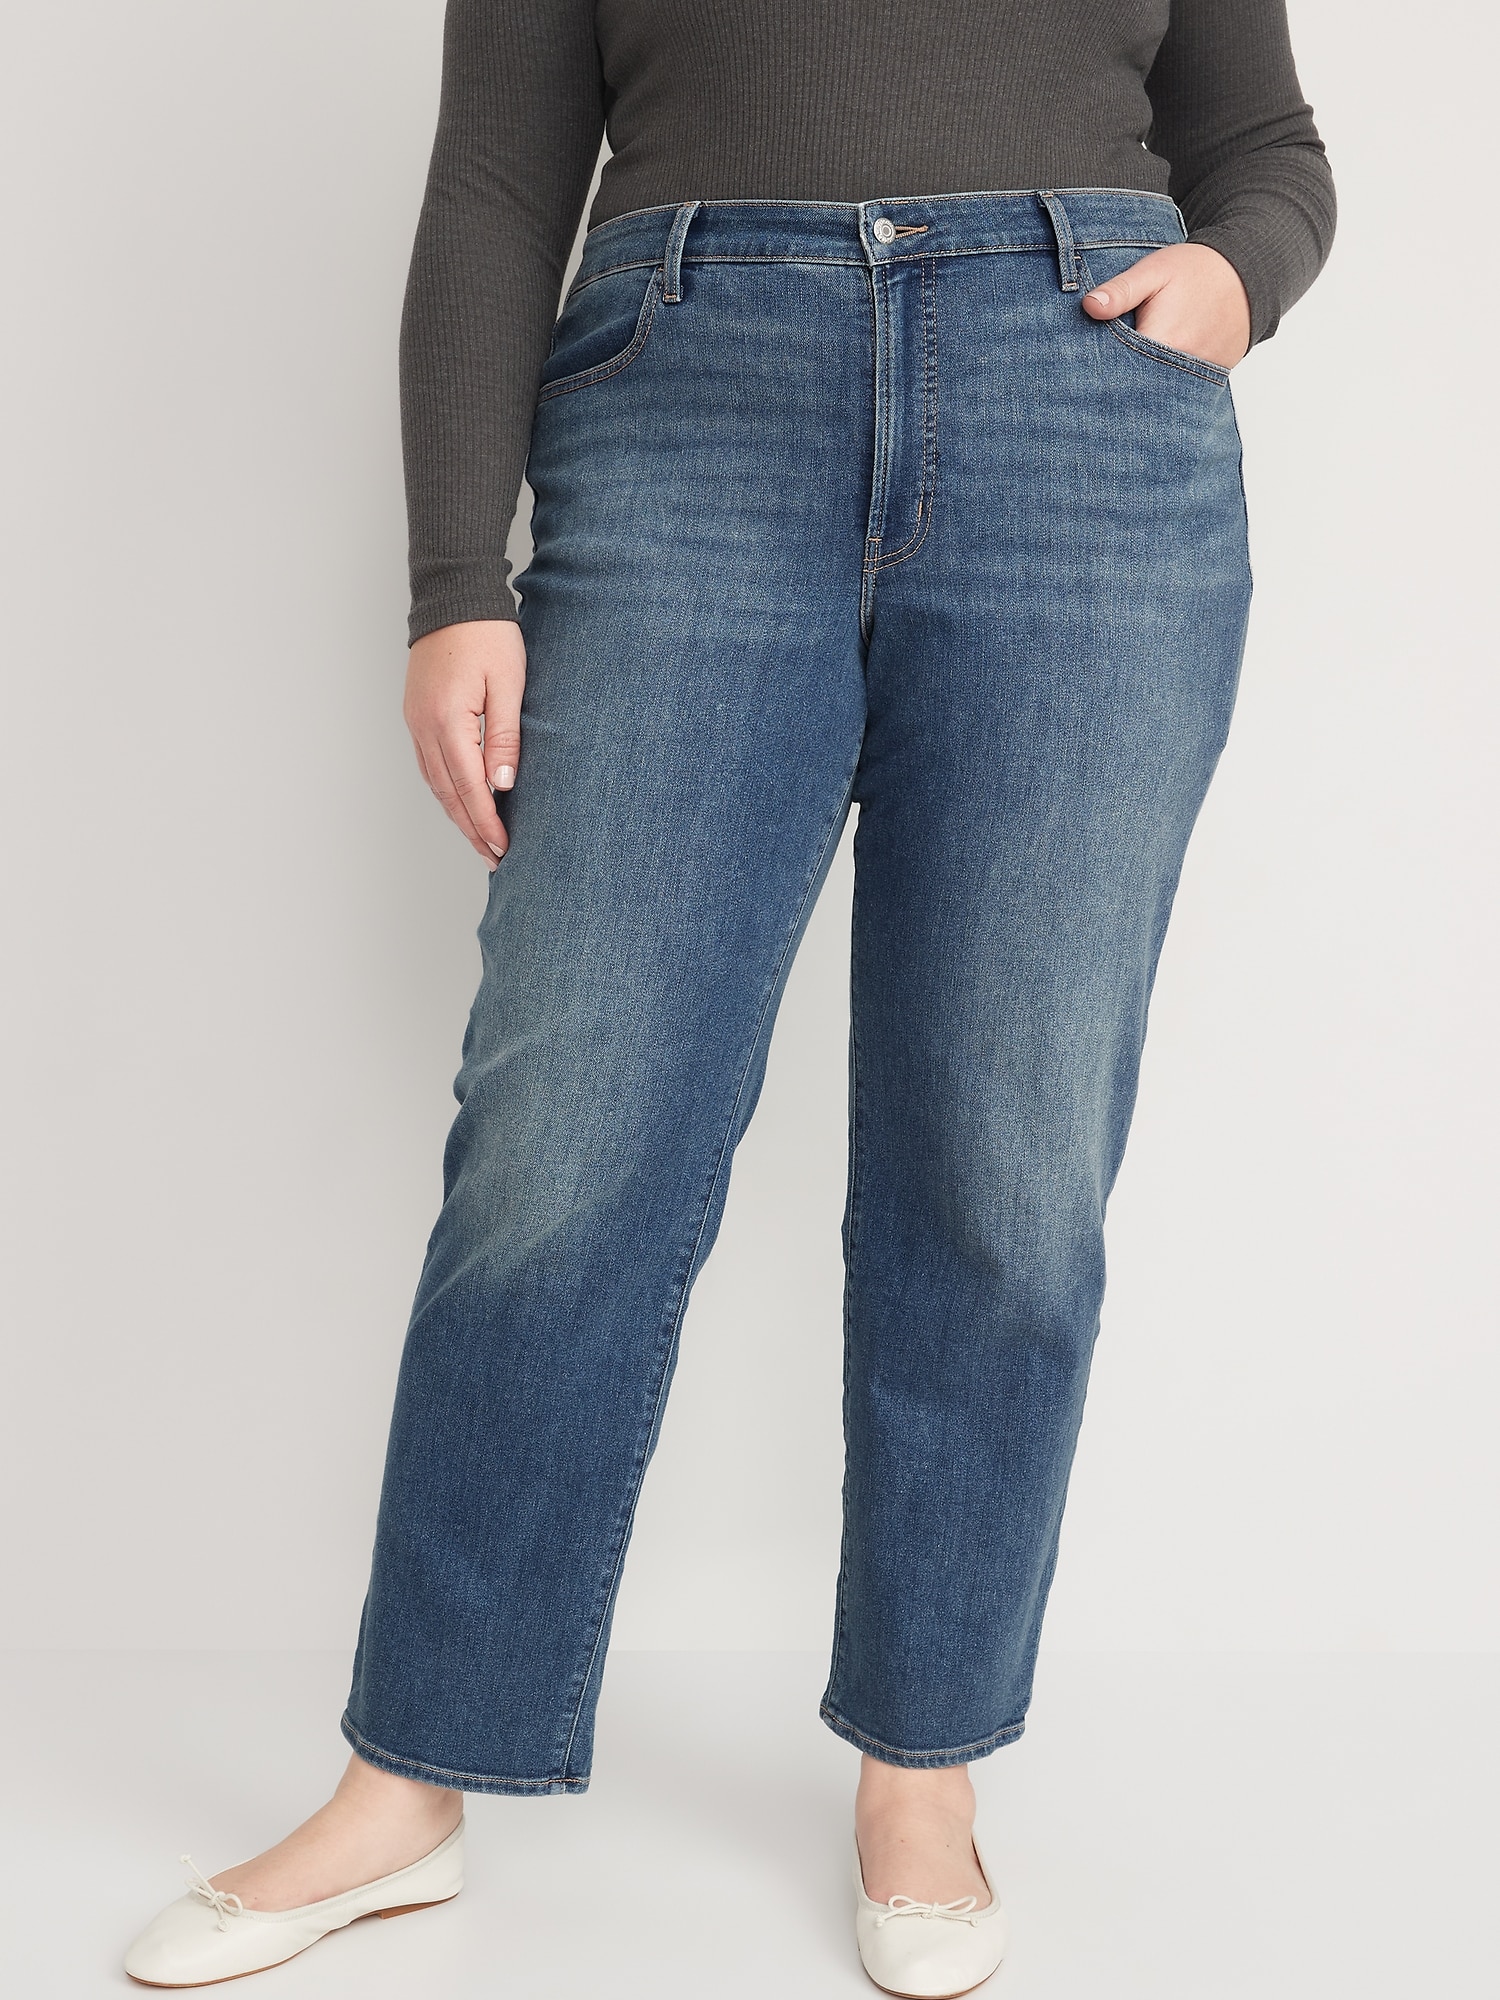 Old Navy Women's High-Waisted Wow Loose Jeans - - Petite Size 4